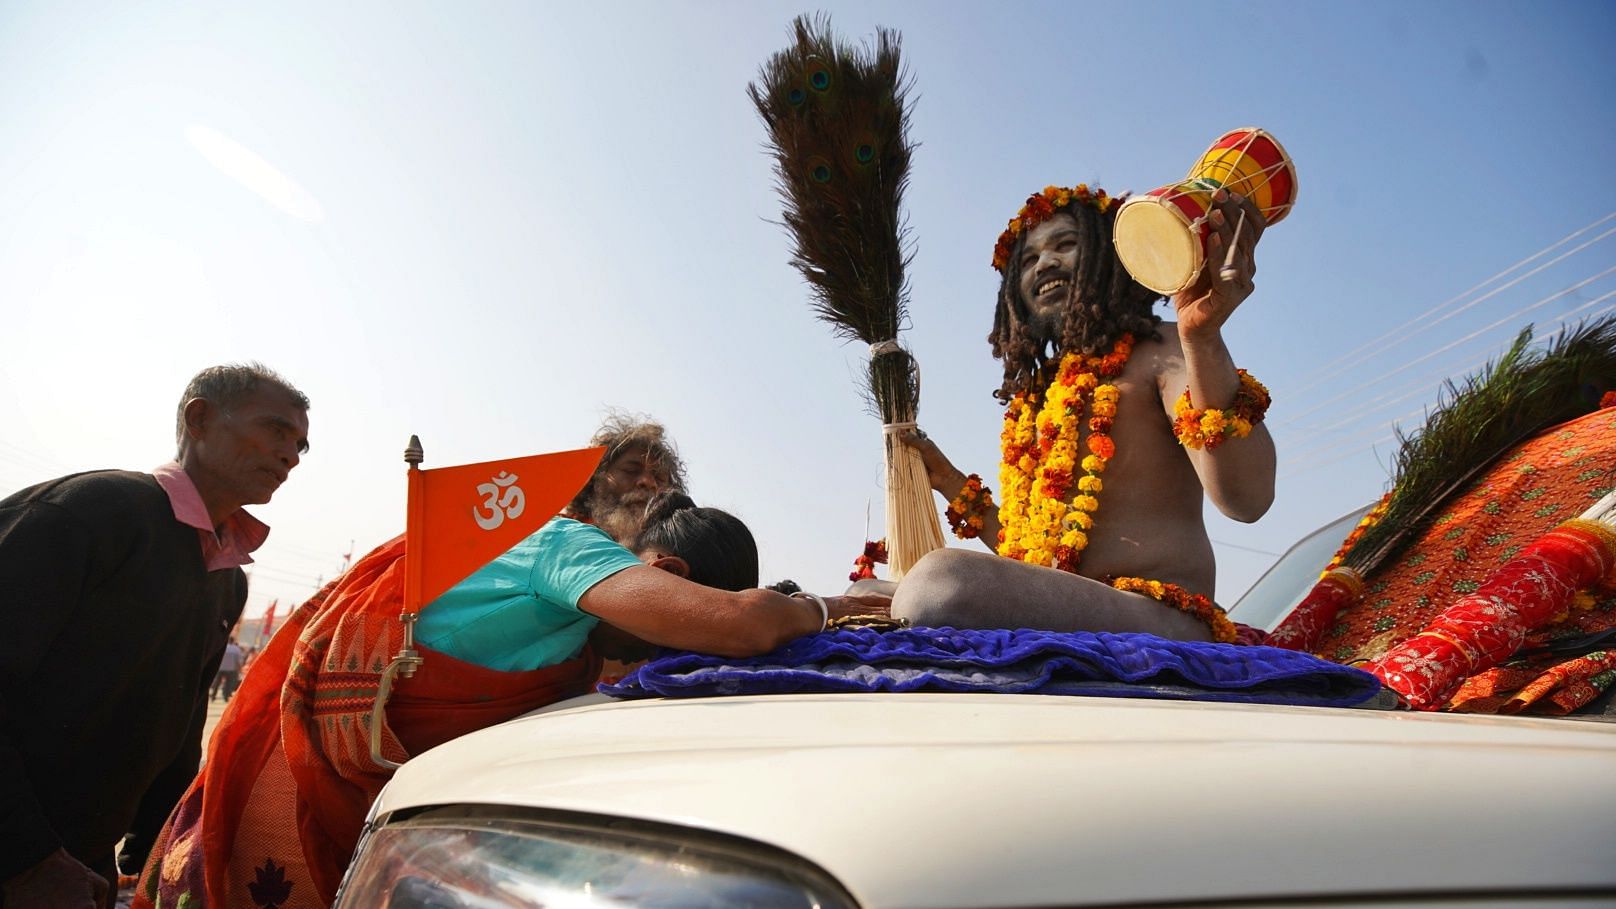 Here’s a glimpse of the Kumbh Nagari, in all its light and colours.